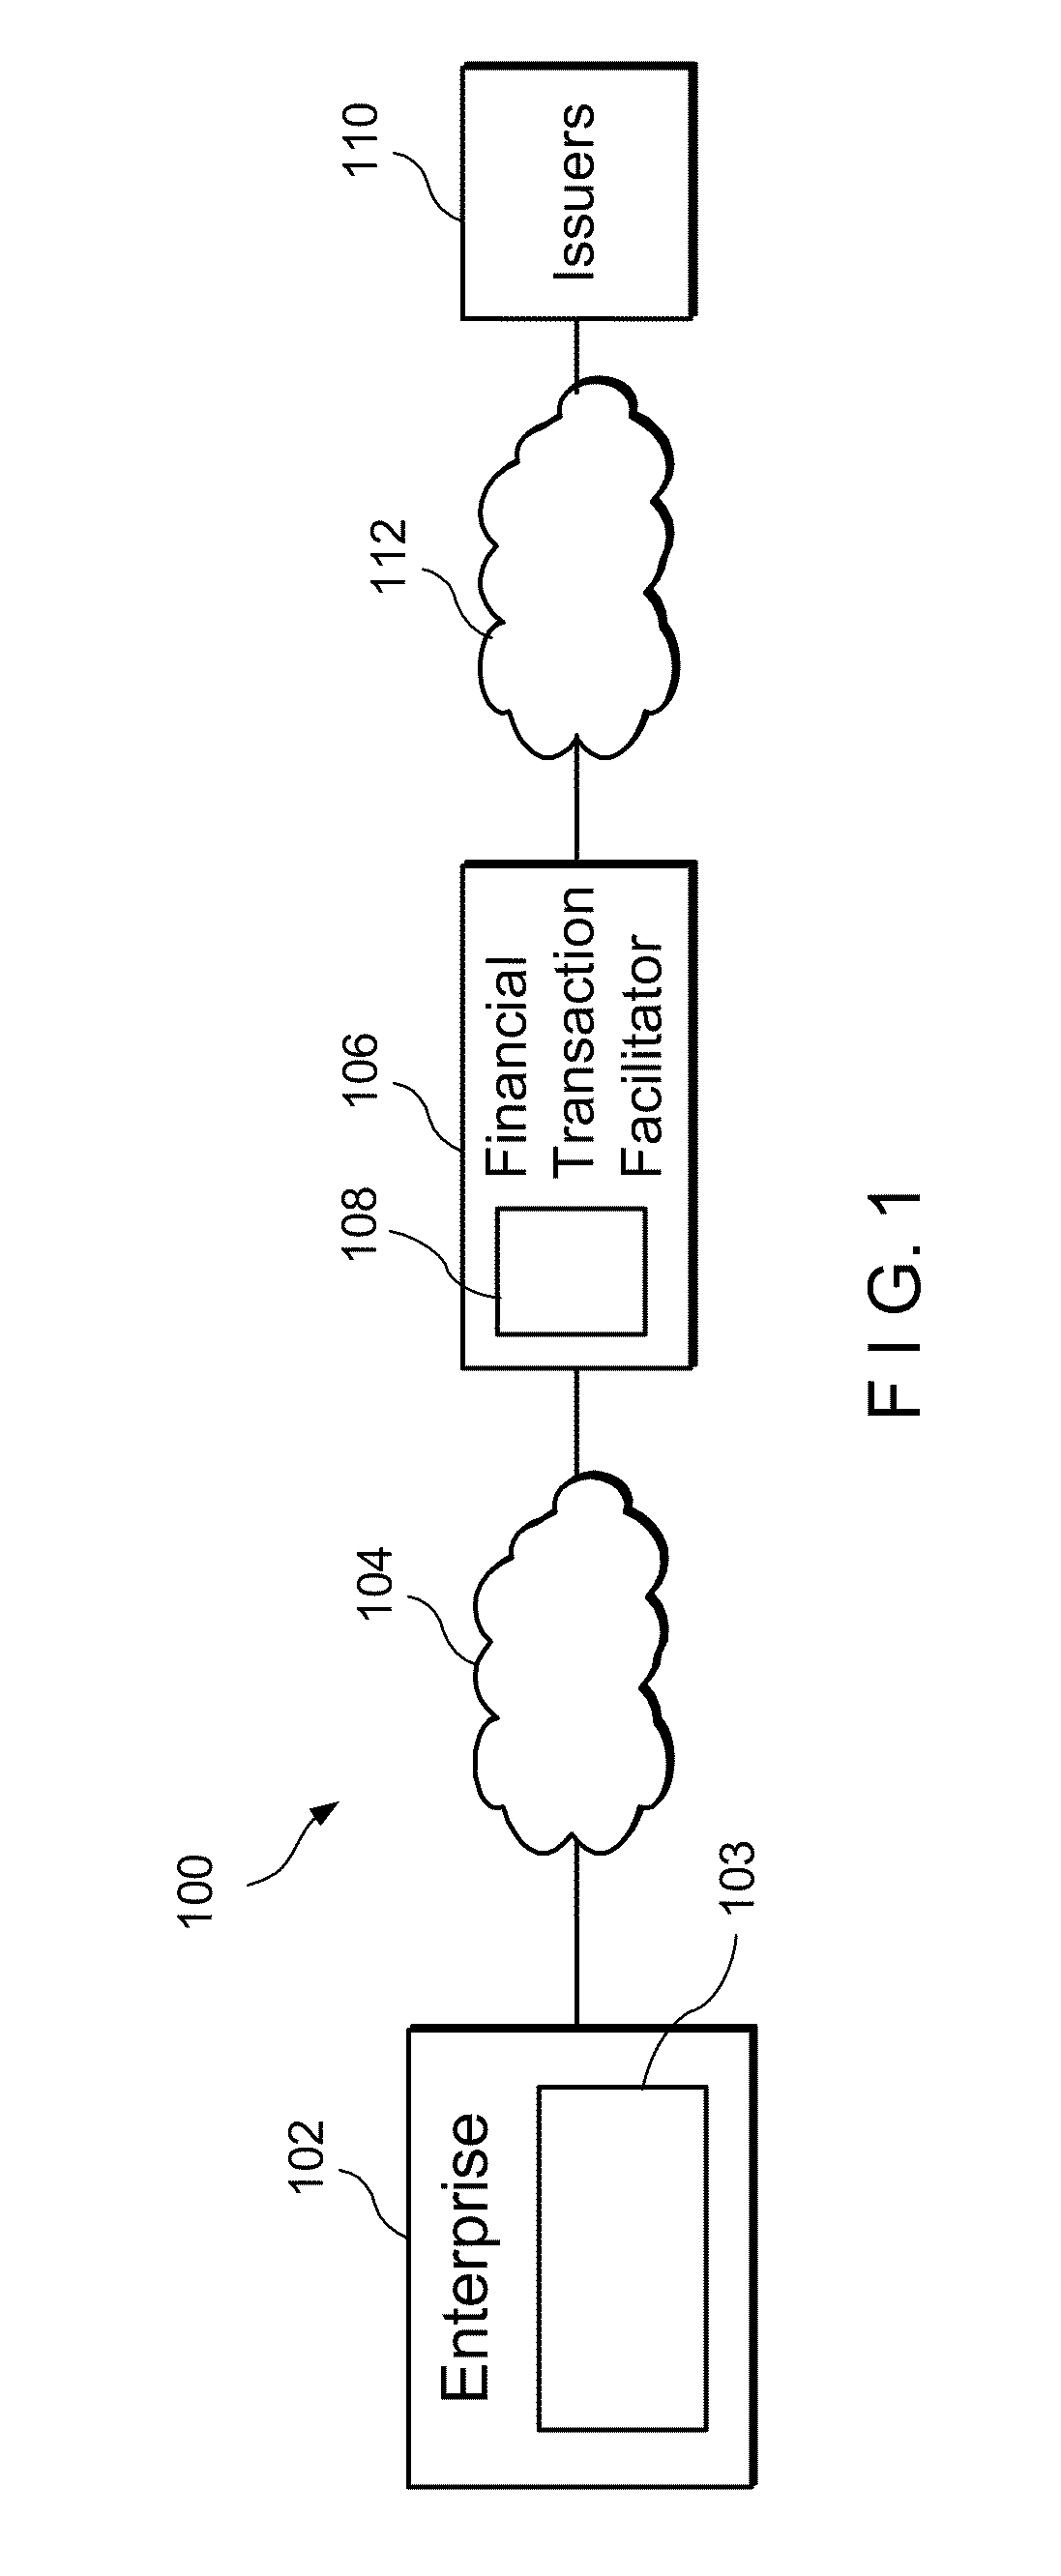 System and Method for Managing Issuance of Financial Accounts